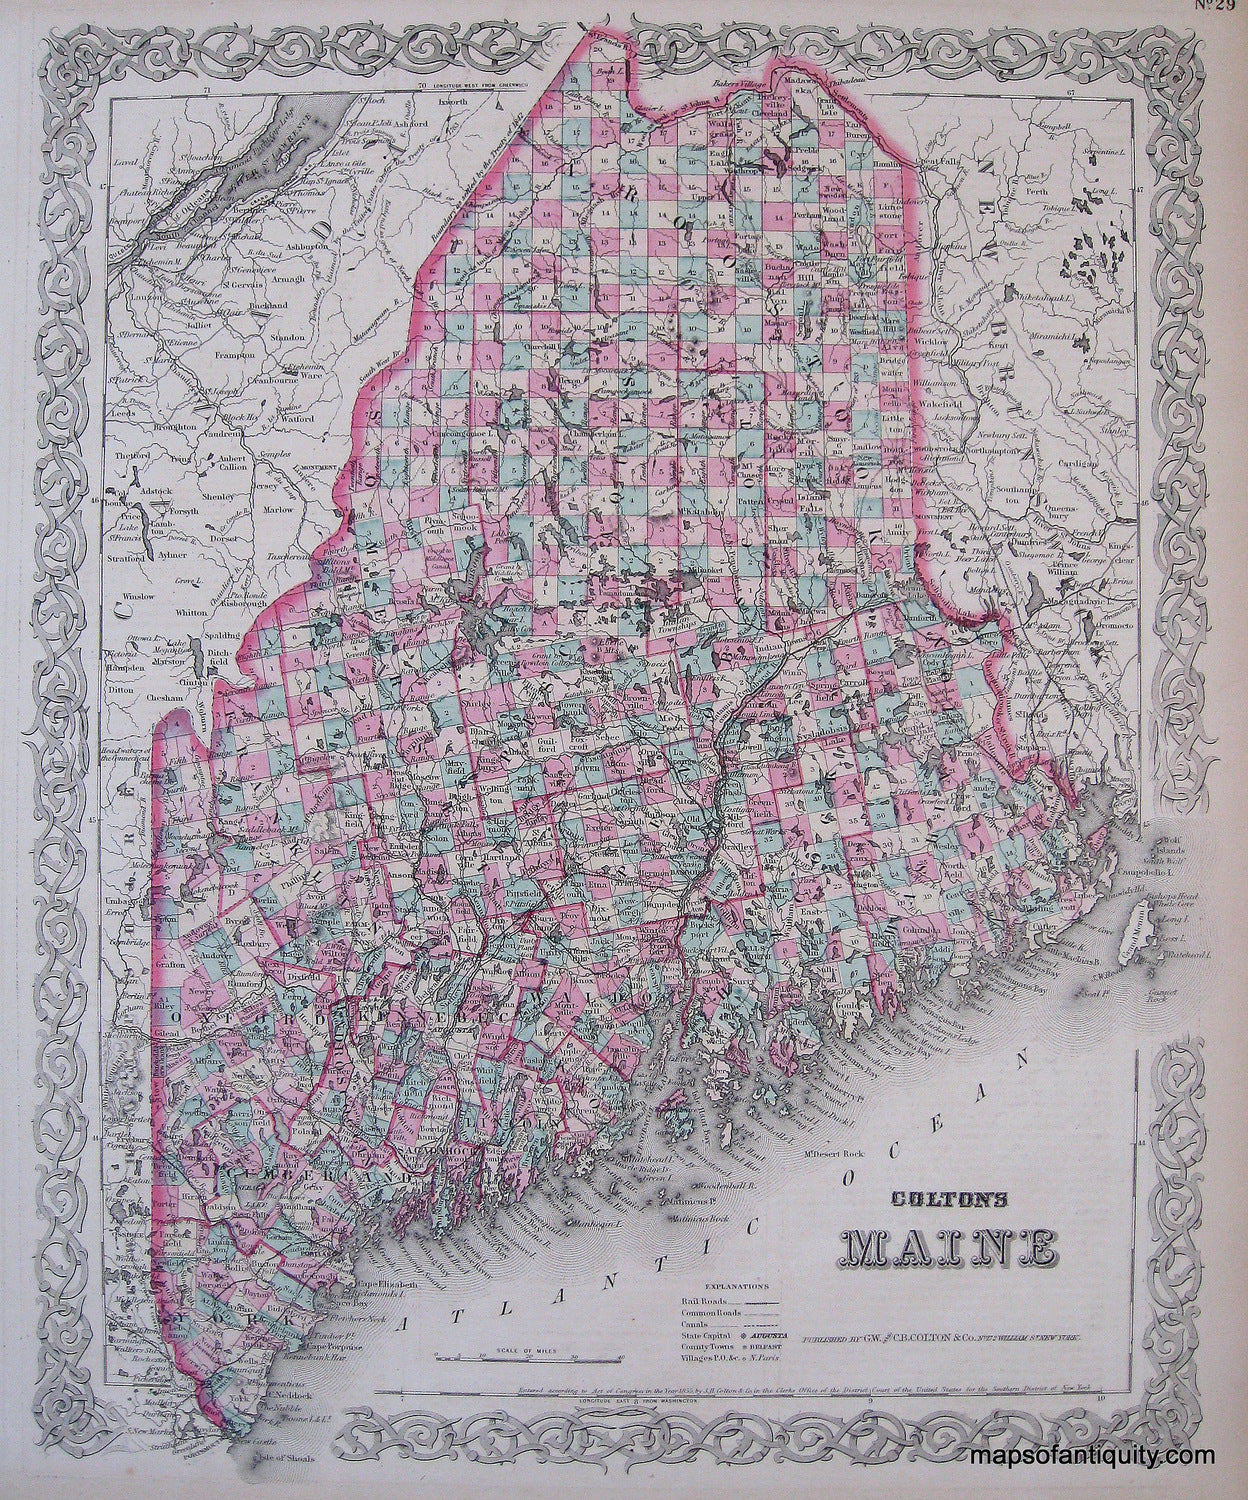 Antique-Hand-Colored-Map-Colton's-Maine-**********-United-States-Northeast-1871-Colton-Maps-Of-Antiquity